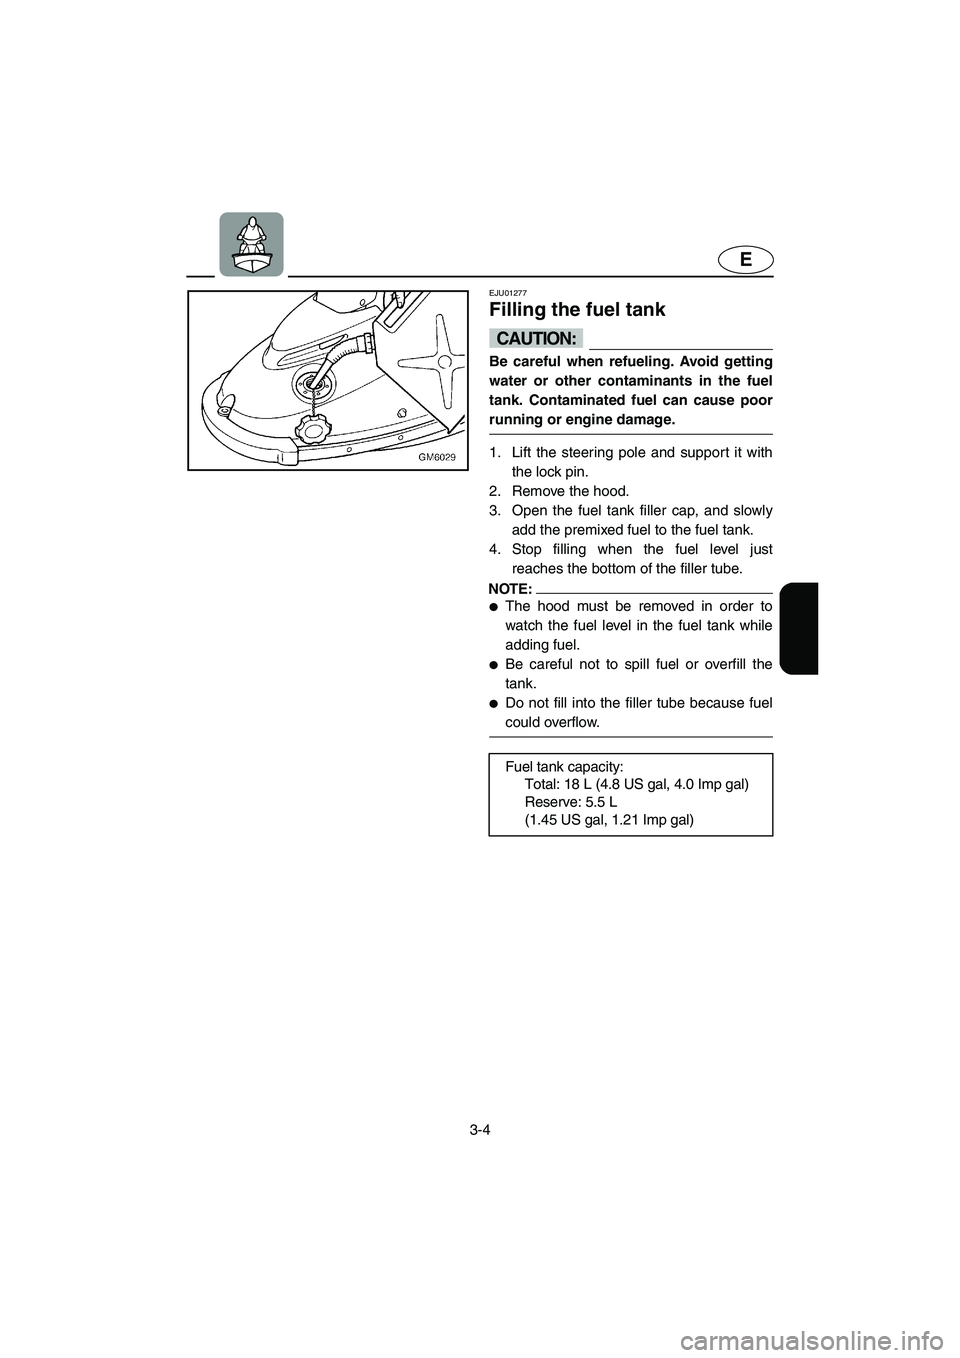 YAMAHA SUPERJET 2005  Owners Manual 3-4
E
EJU01277 
Filling the fuel tank  
CAUTION:@ Be careful when refueling. Avoid getting
water or other contaminants in the fuel
tank. Contaminated fuel can cause poor
running or engine damage. 
@ 
